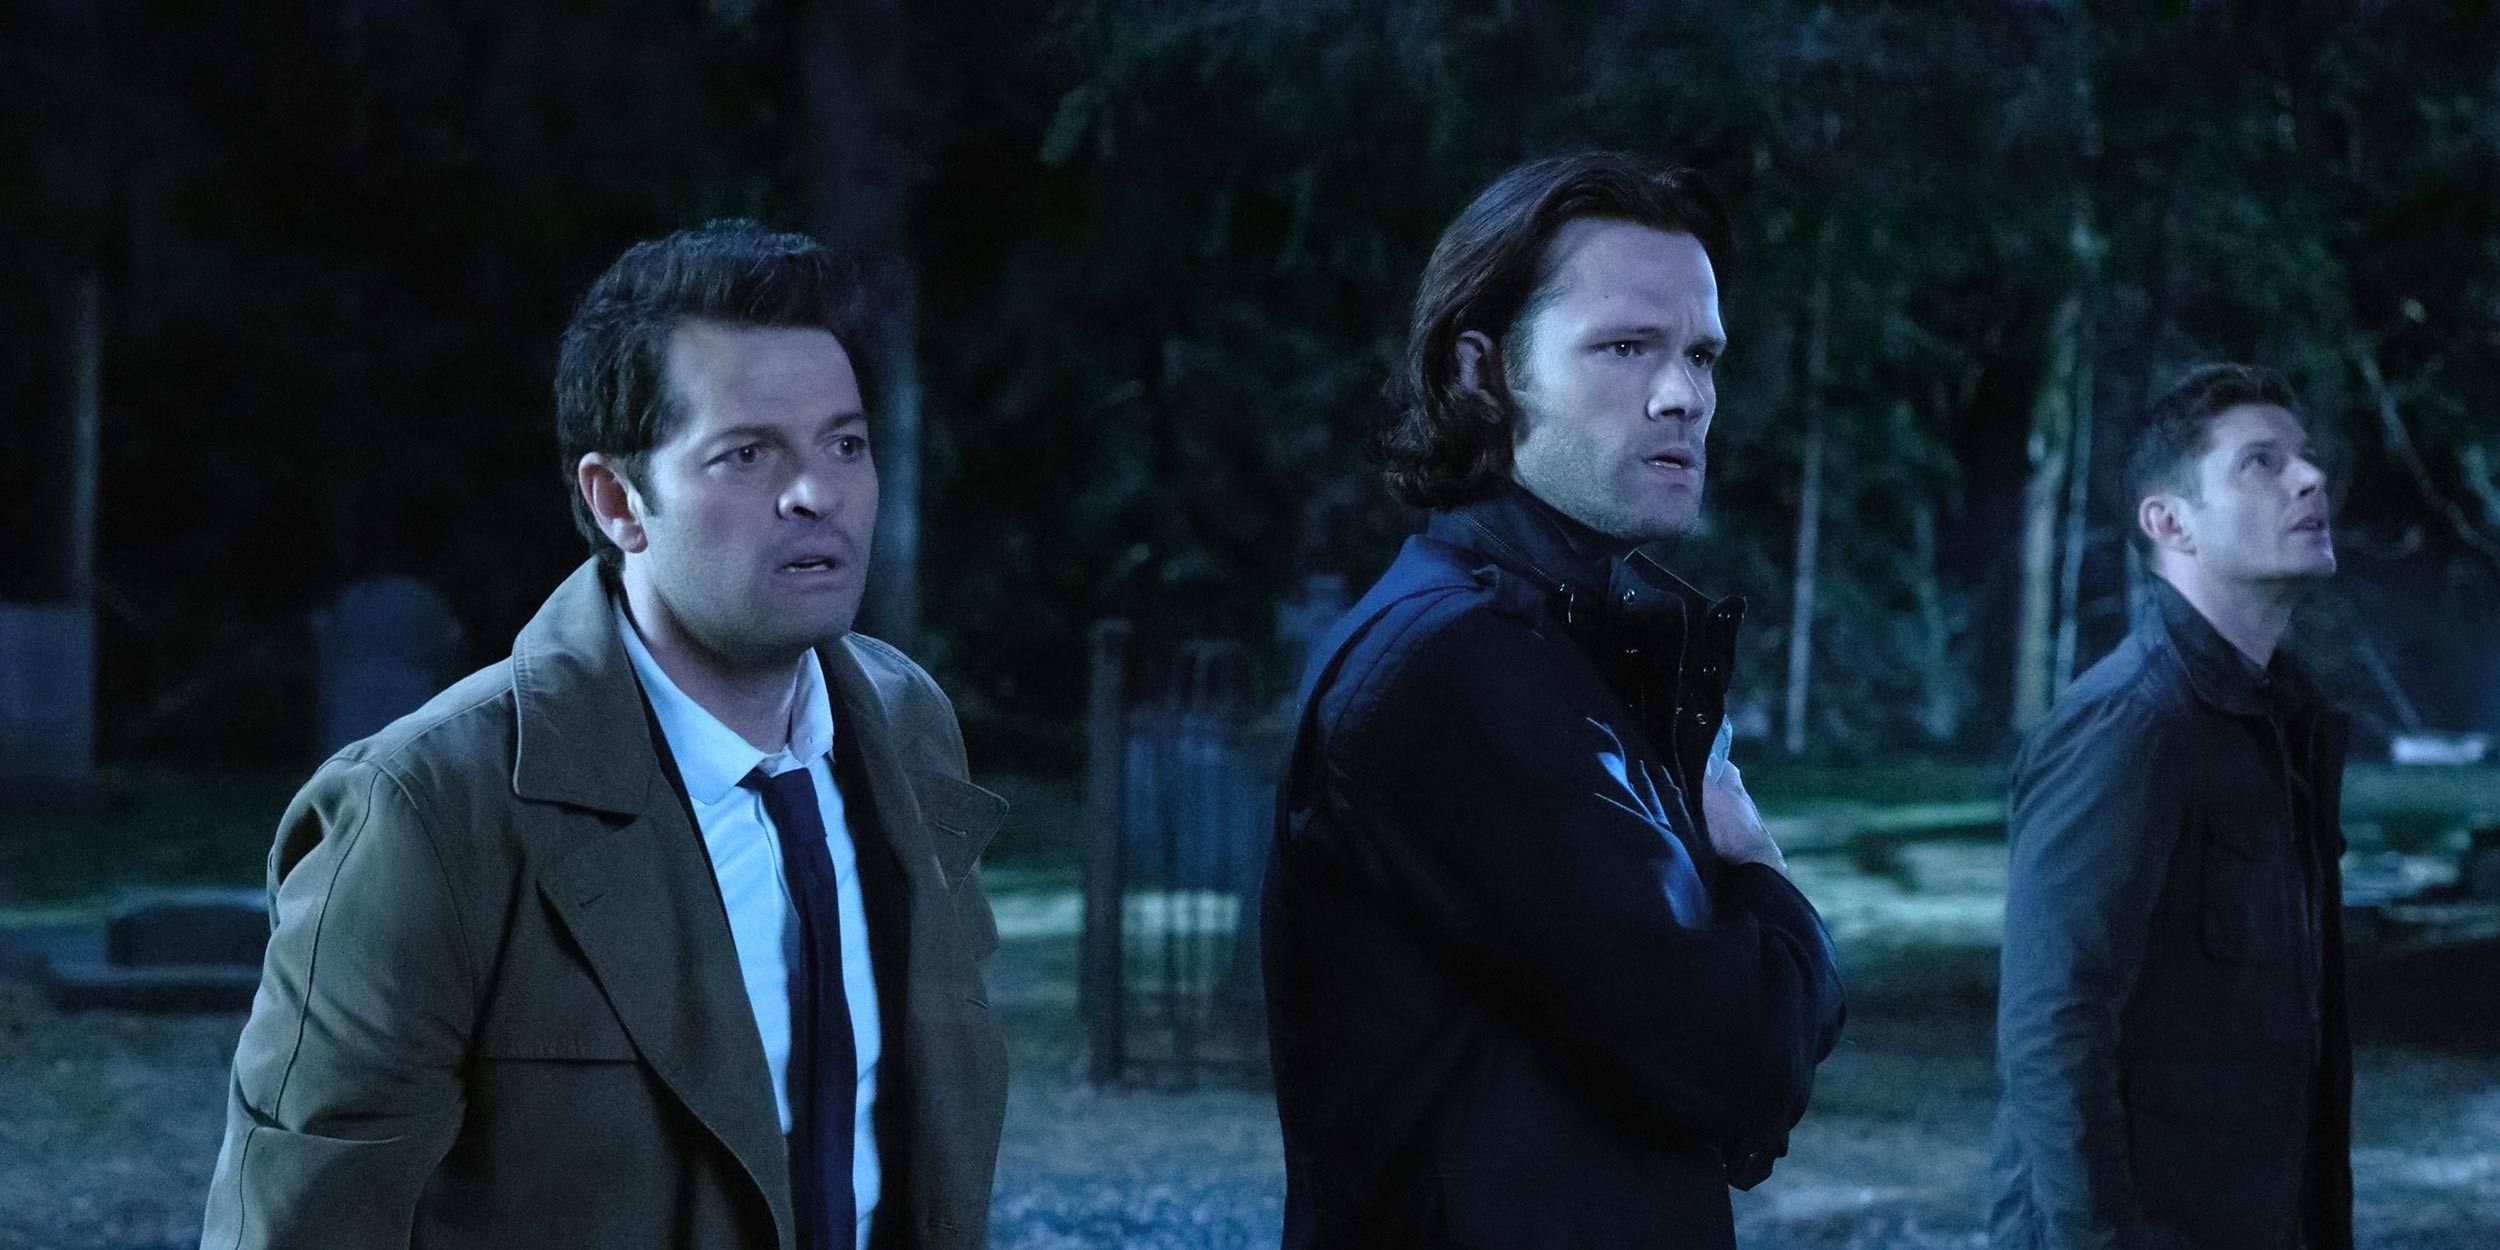 Castiel, Sam, and Dean are shocked on a hunt in Supernatural season 14